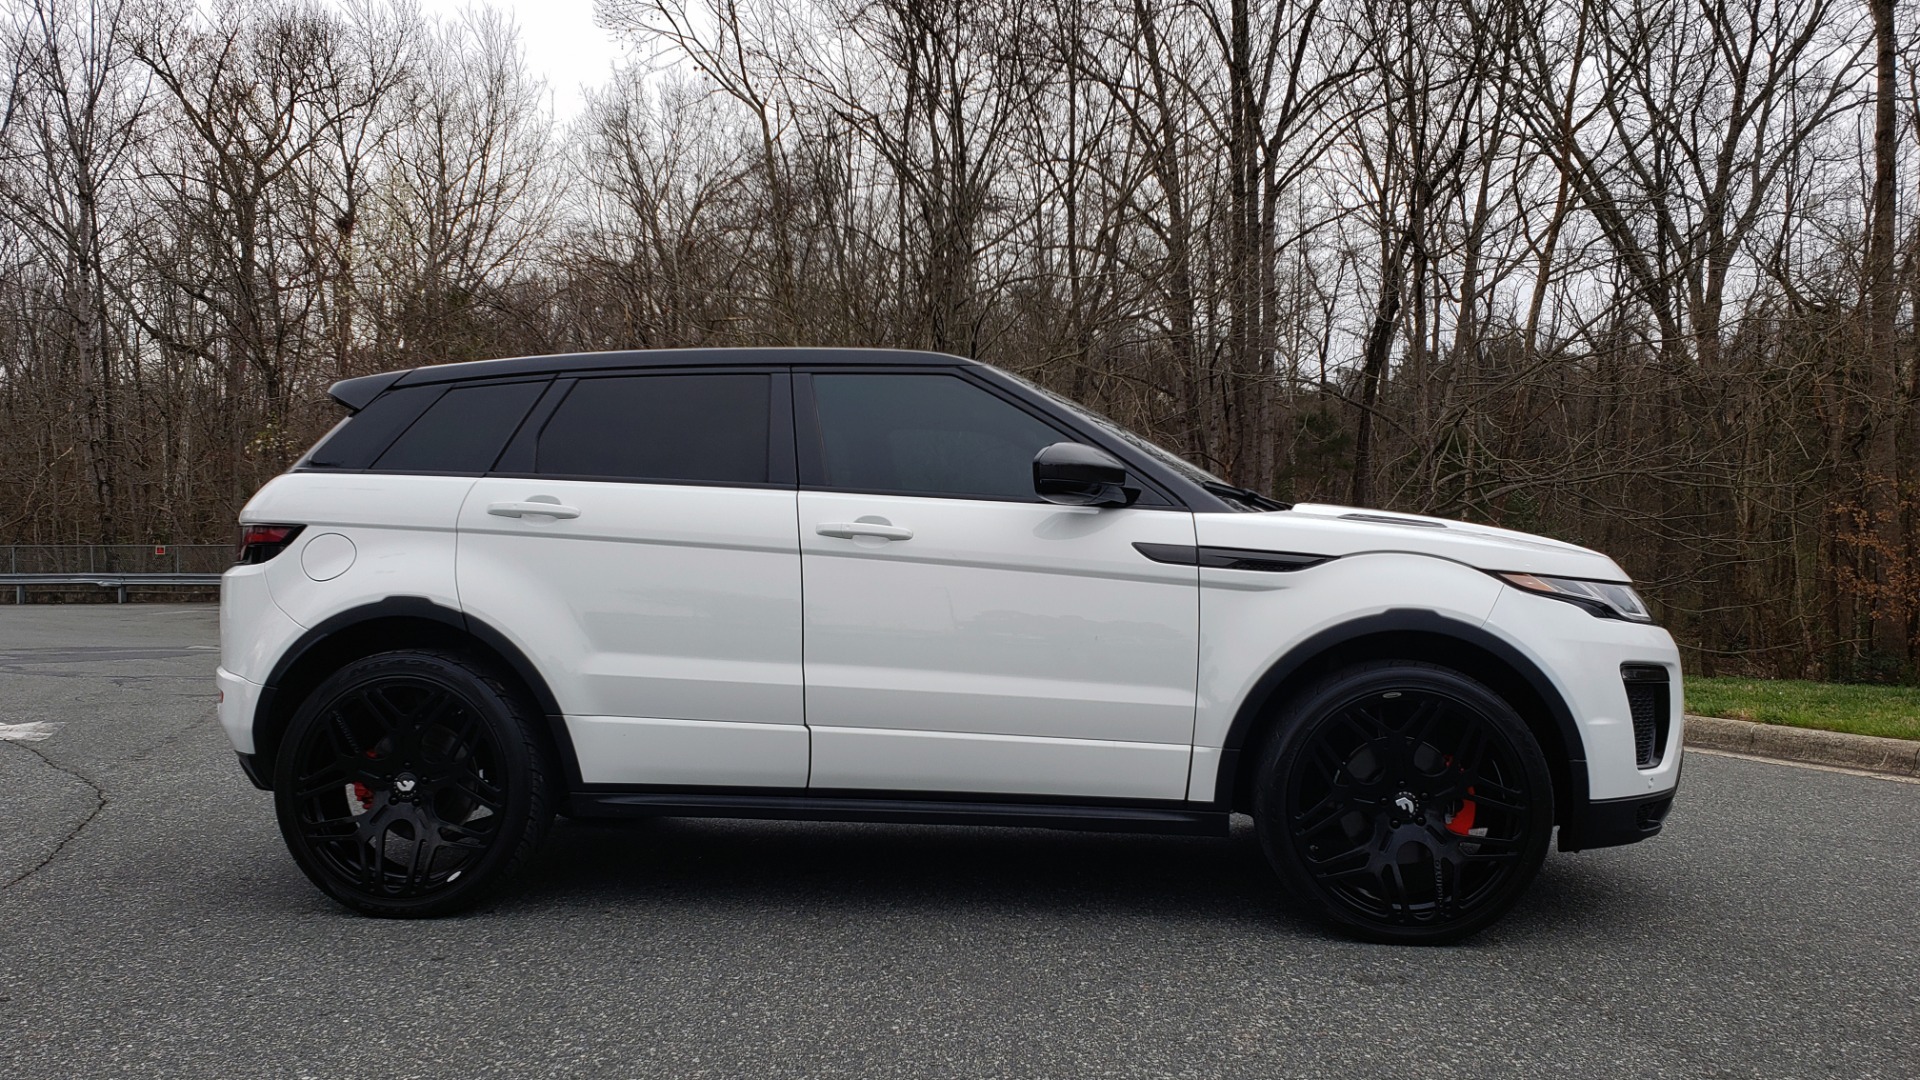 Used 2016 Land Rover RANGE ROVER EVOQUE HSE DYNAMIC / AWD / NAV / PANO-ROOF / REARVIEW / 22-IN WHEELS for sale Sold at Formula Imports in Charlotte NC 28227 6